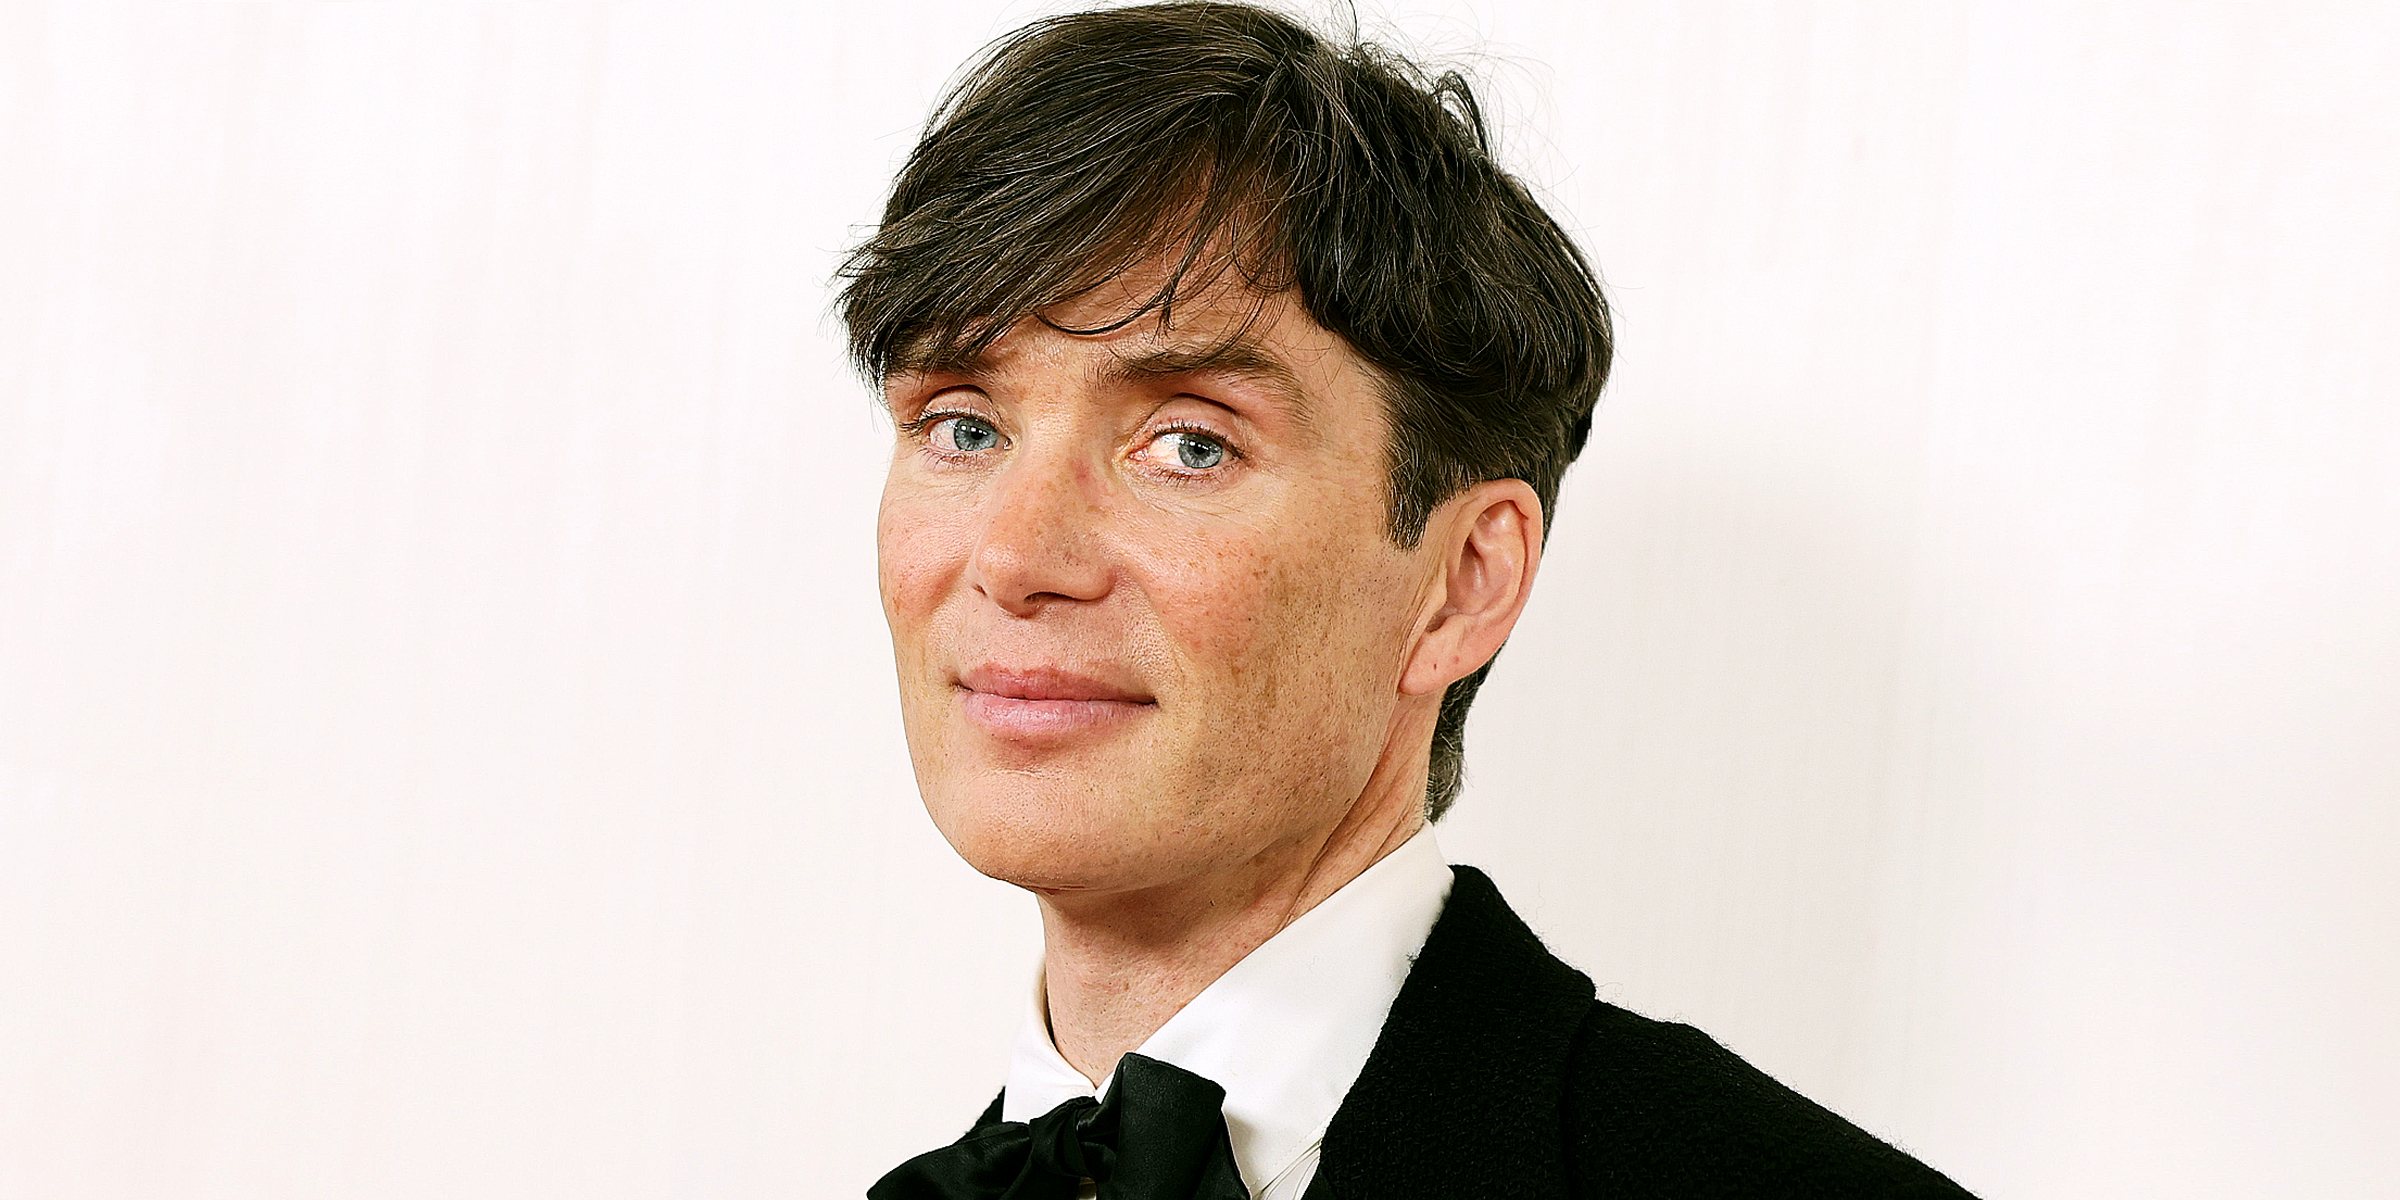 Cillian Murphy | Source: Getty Images